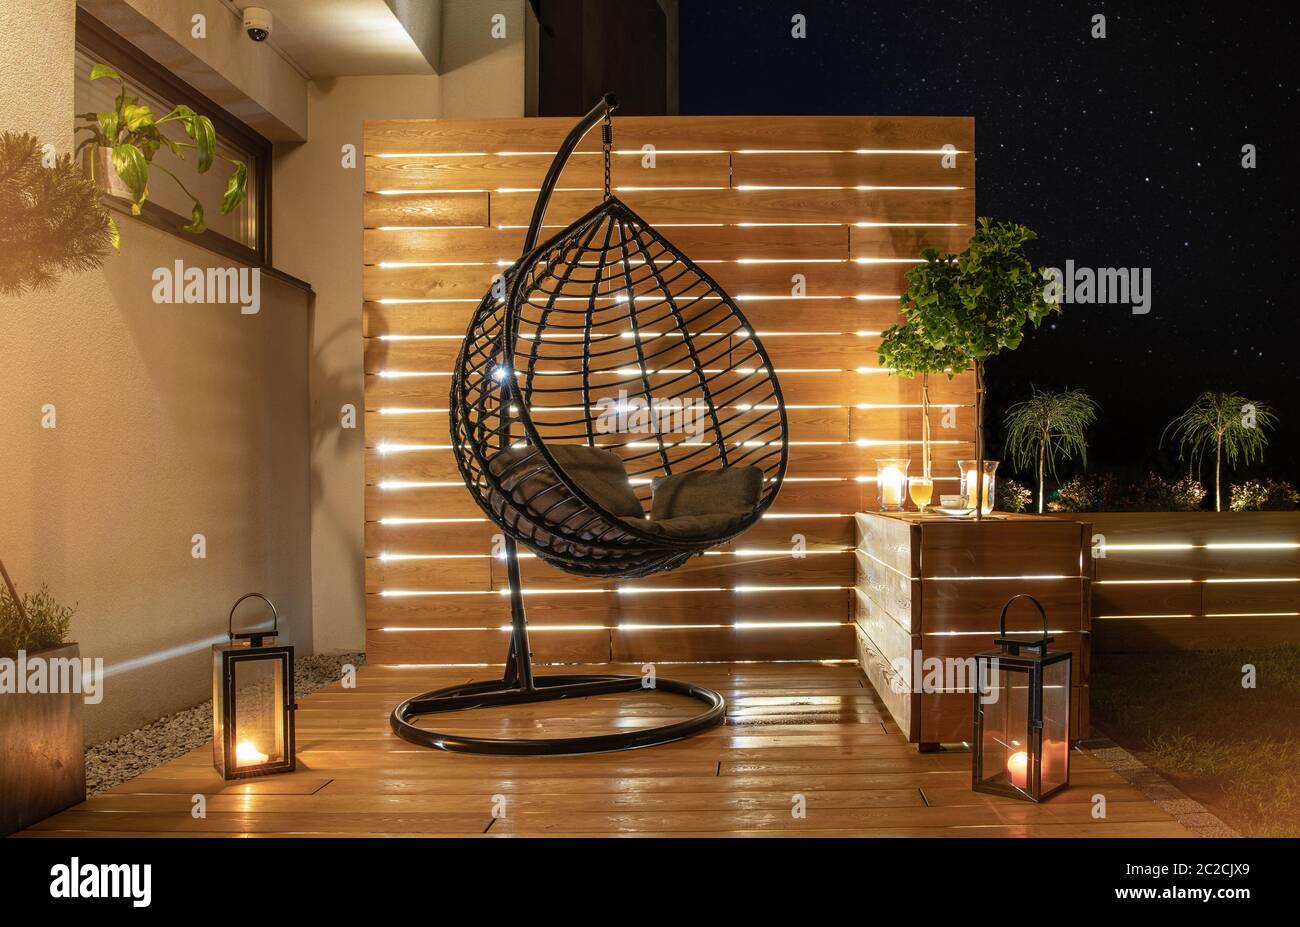 Garden Furniture Design. Starry Night Time in Stylish Backyard Garden with Wooden Porch with Wall and Planters Illuminated by Modern LED Lighting. Stock Photo